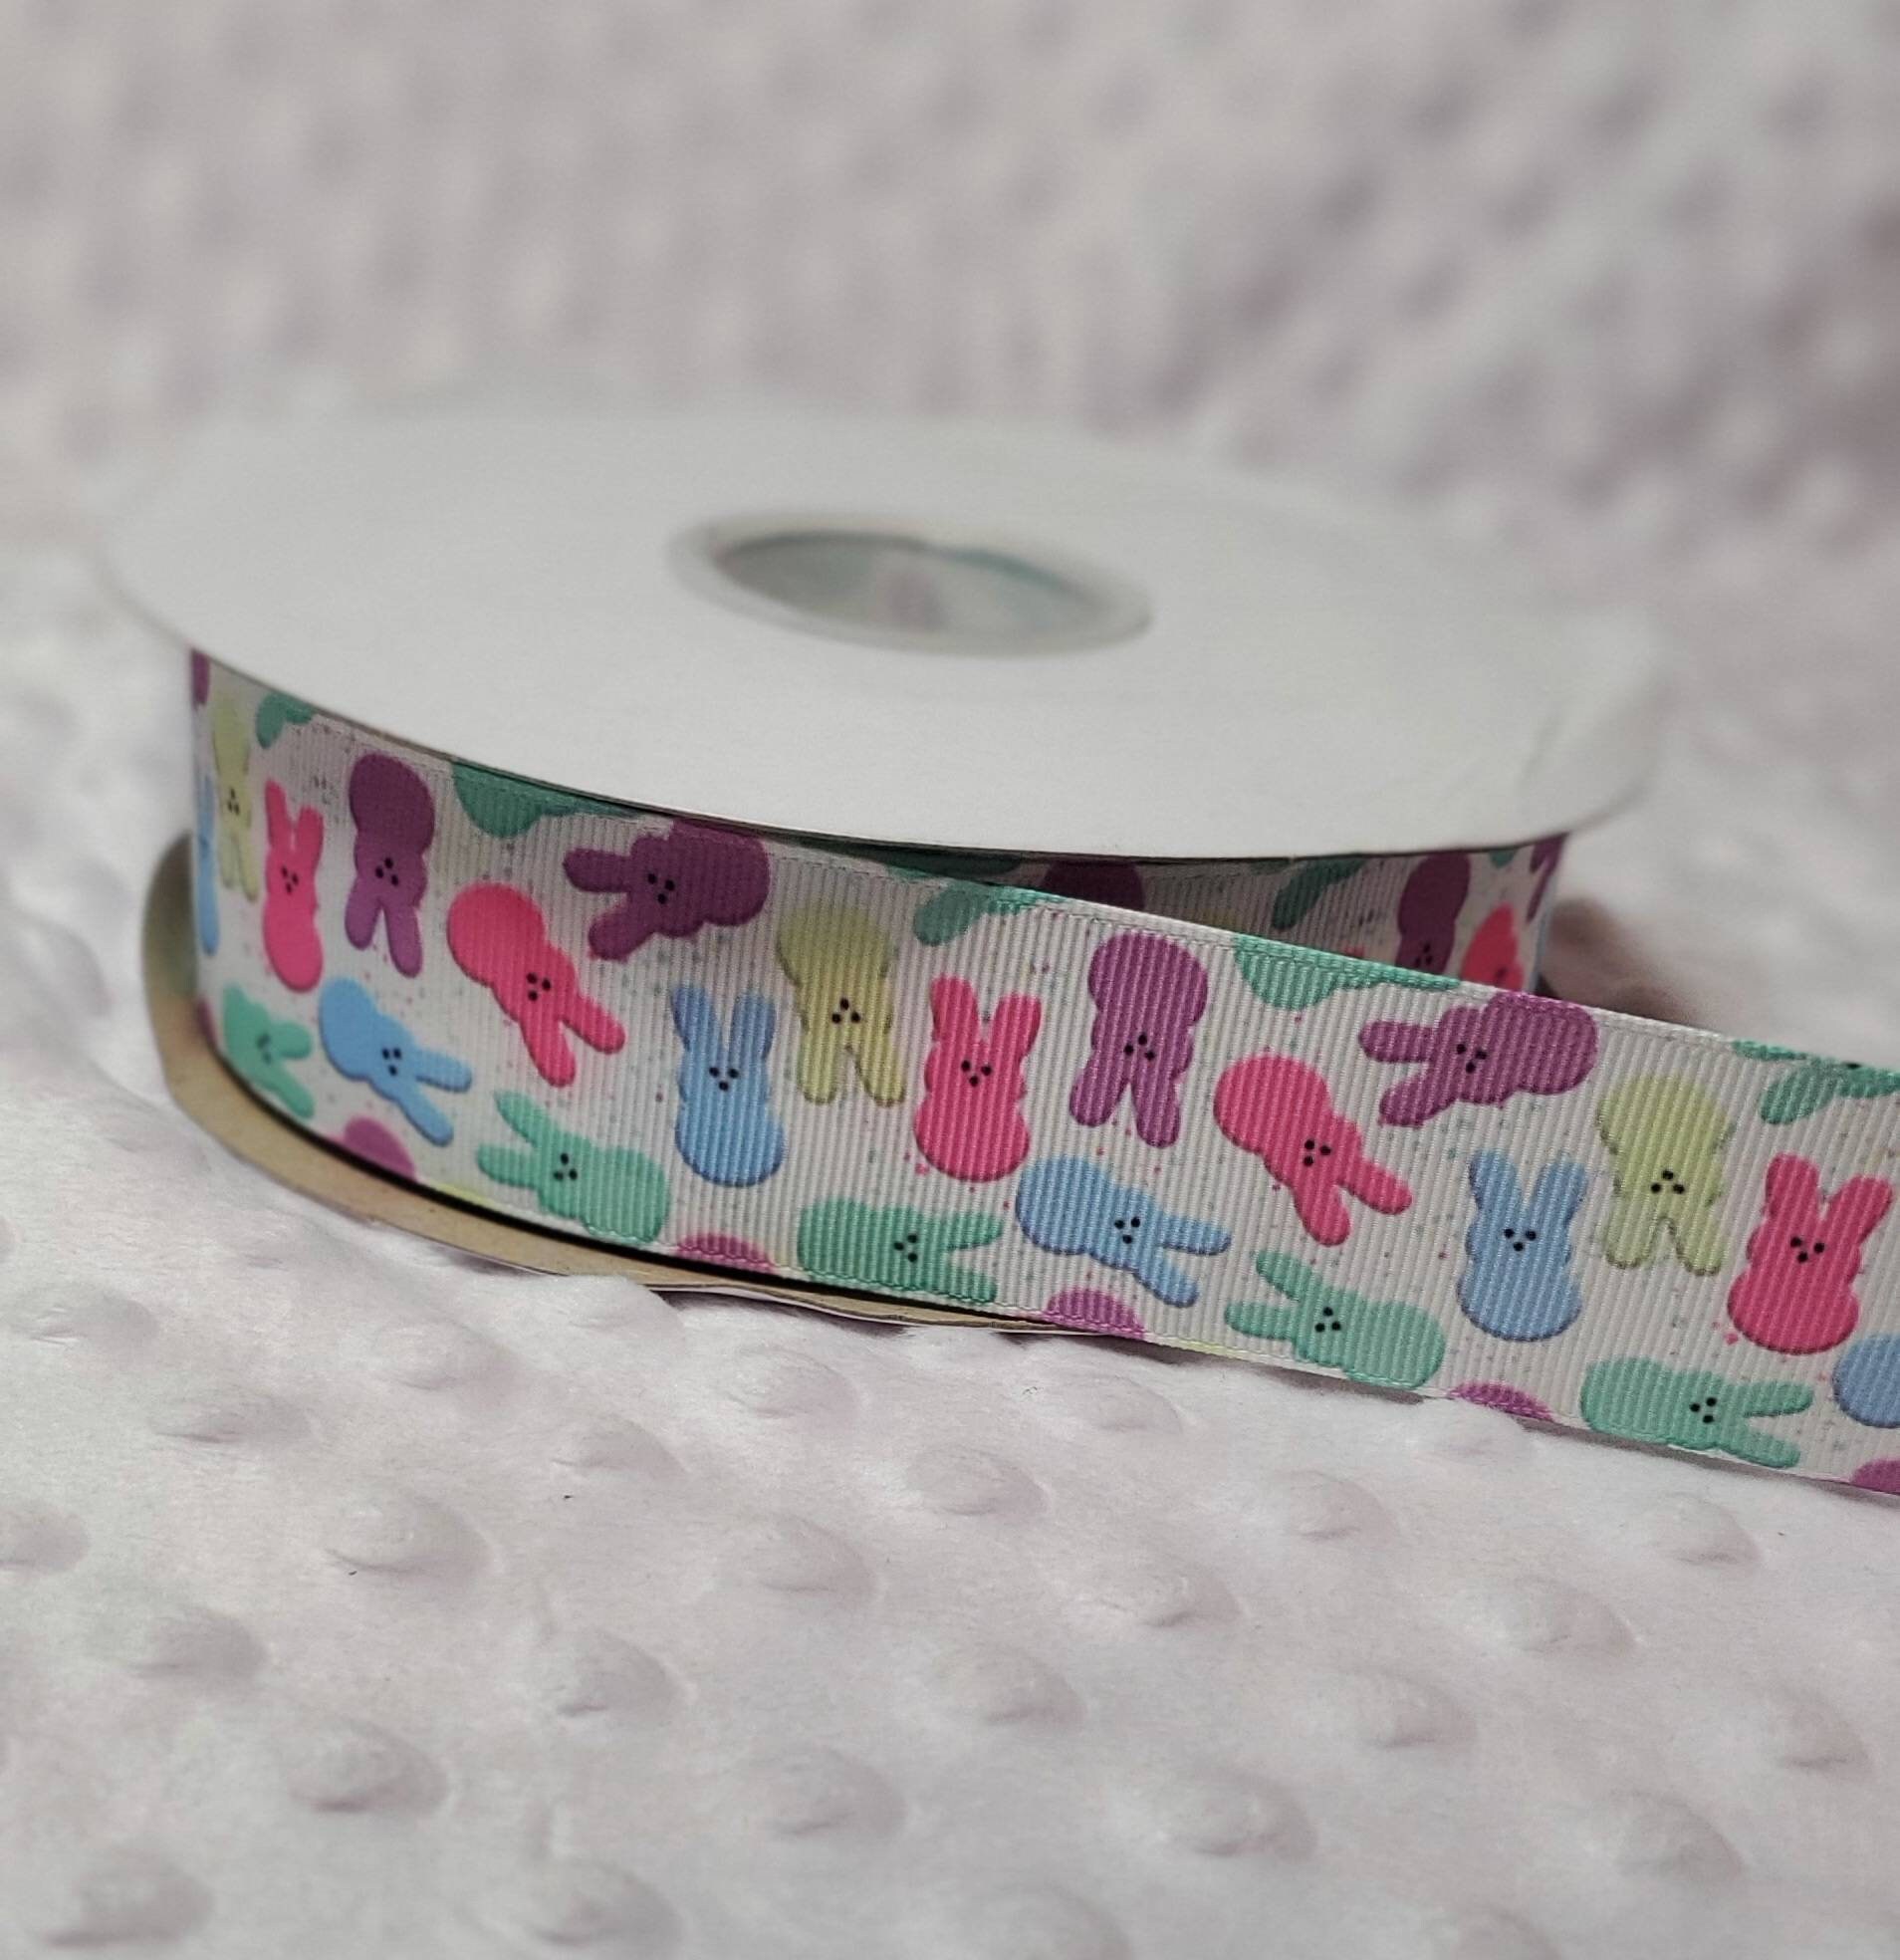 12 Pack: 5/8 x 7yd. Double Faced Satin Ribbon by Celebrate It